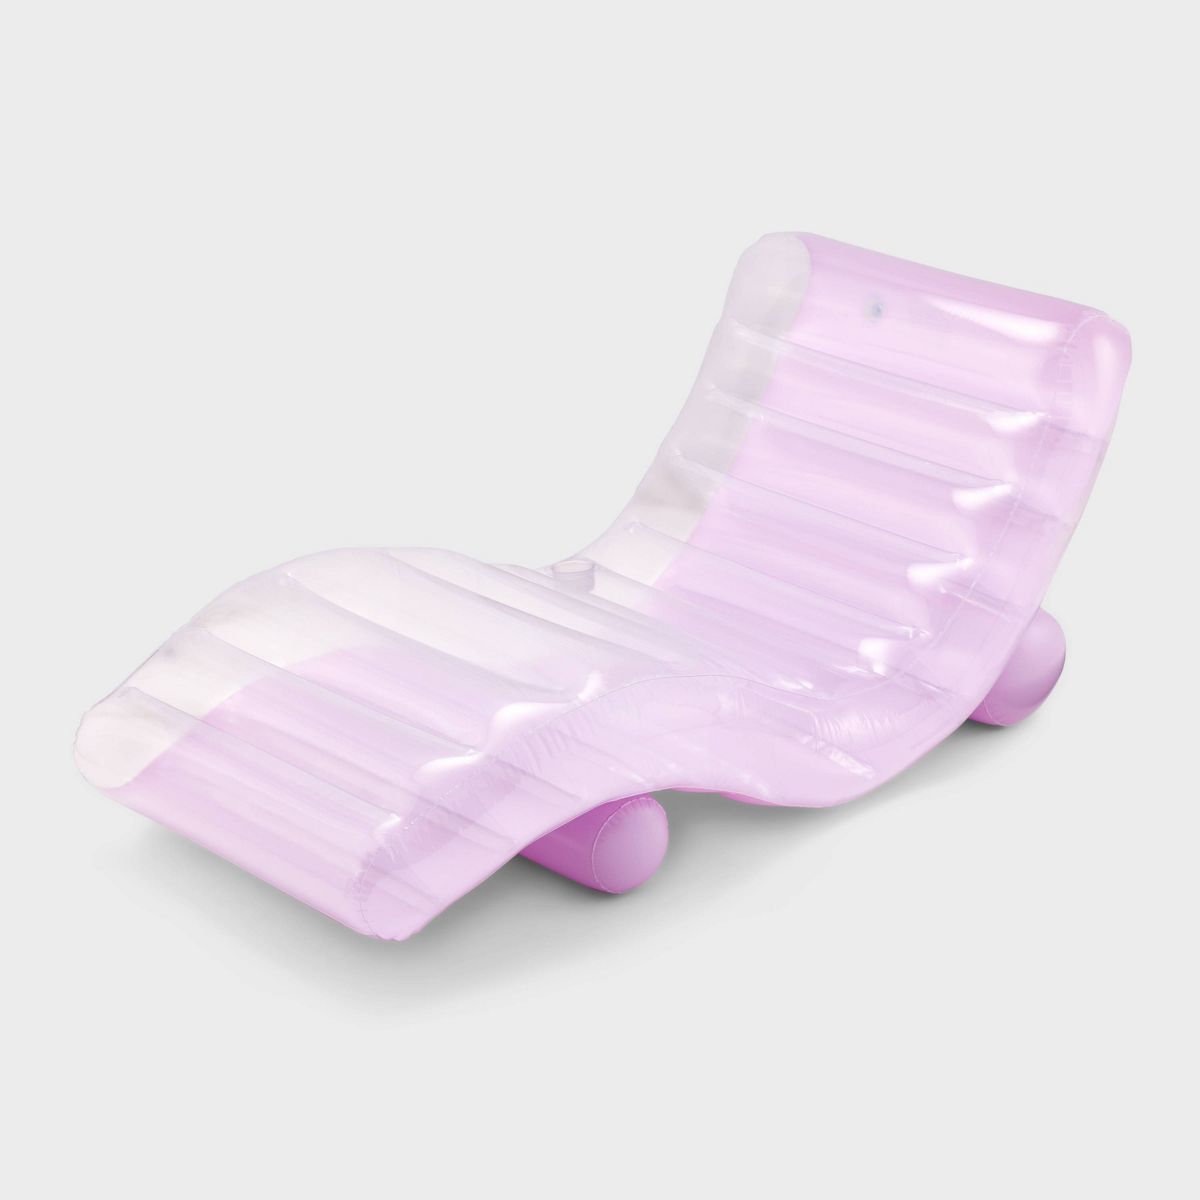 Inflatable Chaise Lounge Float - Sun Squad™ | Target